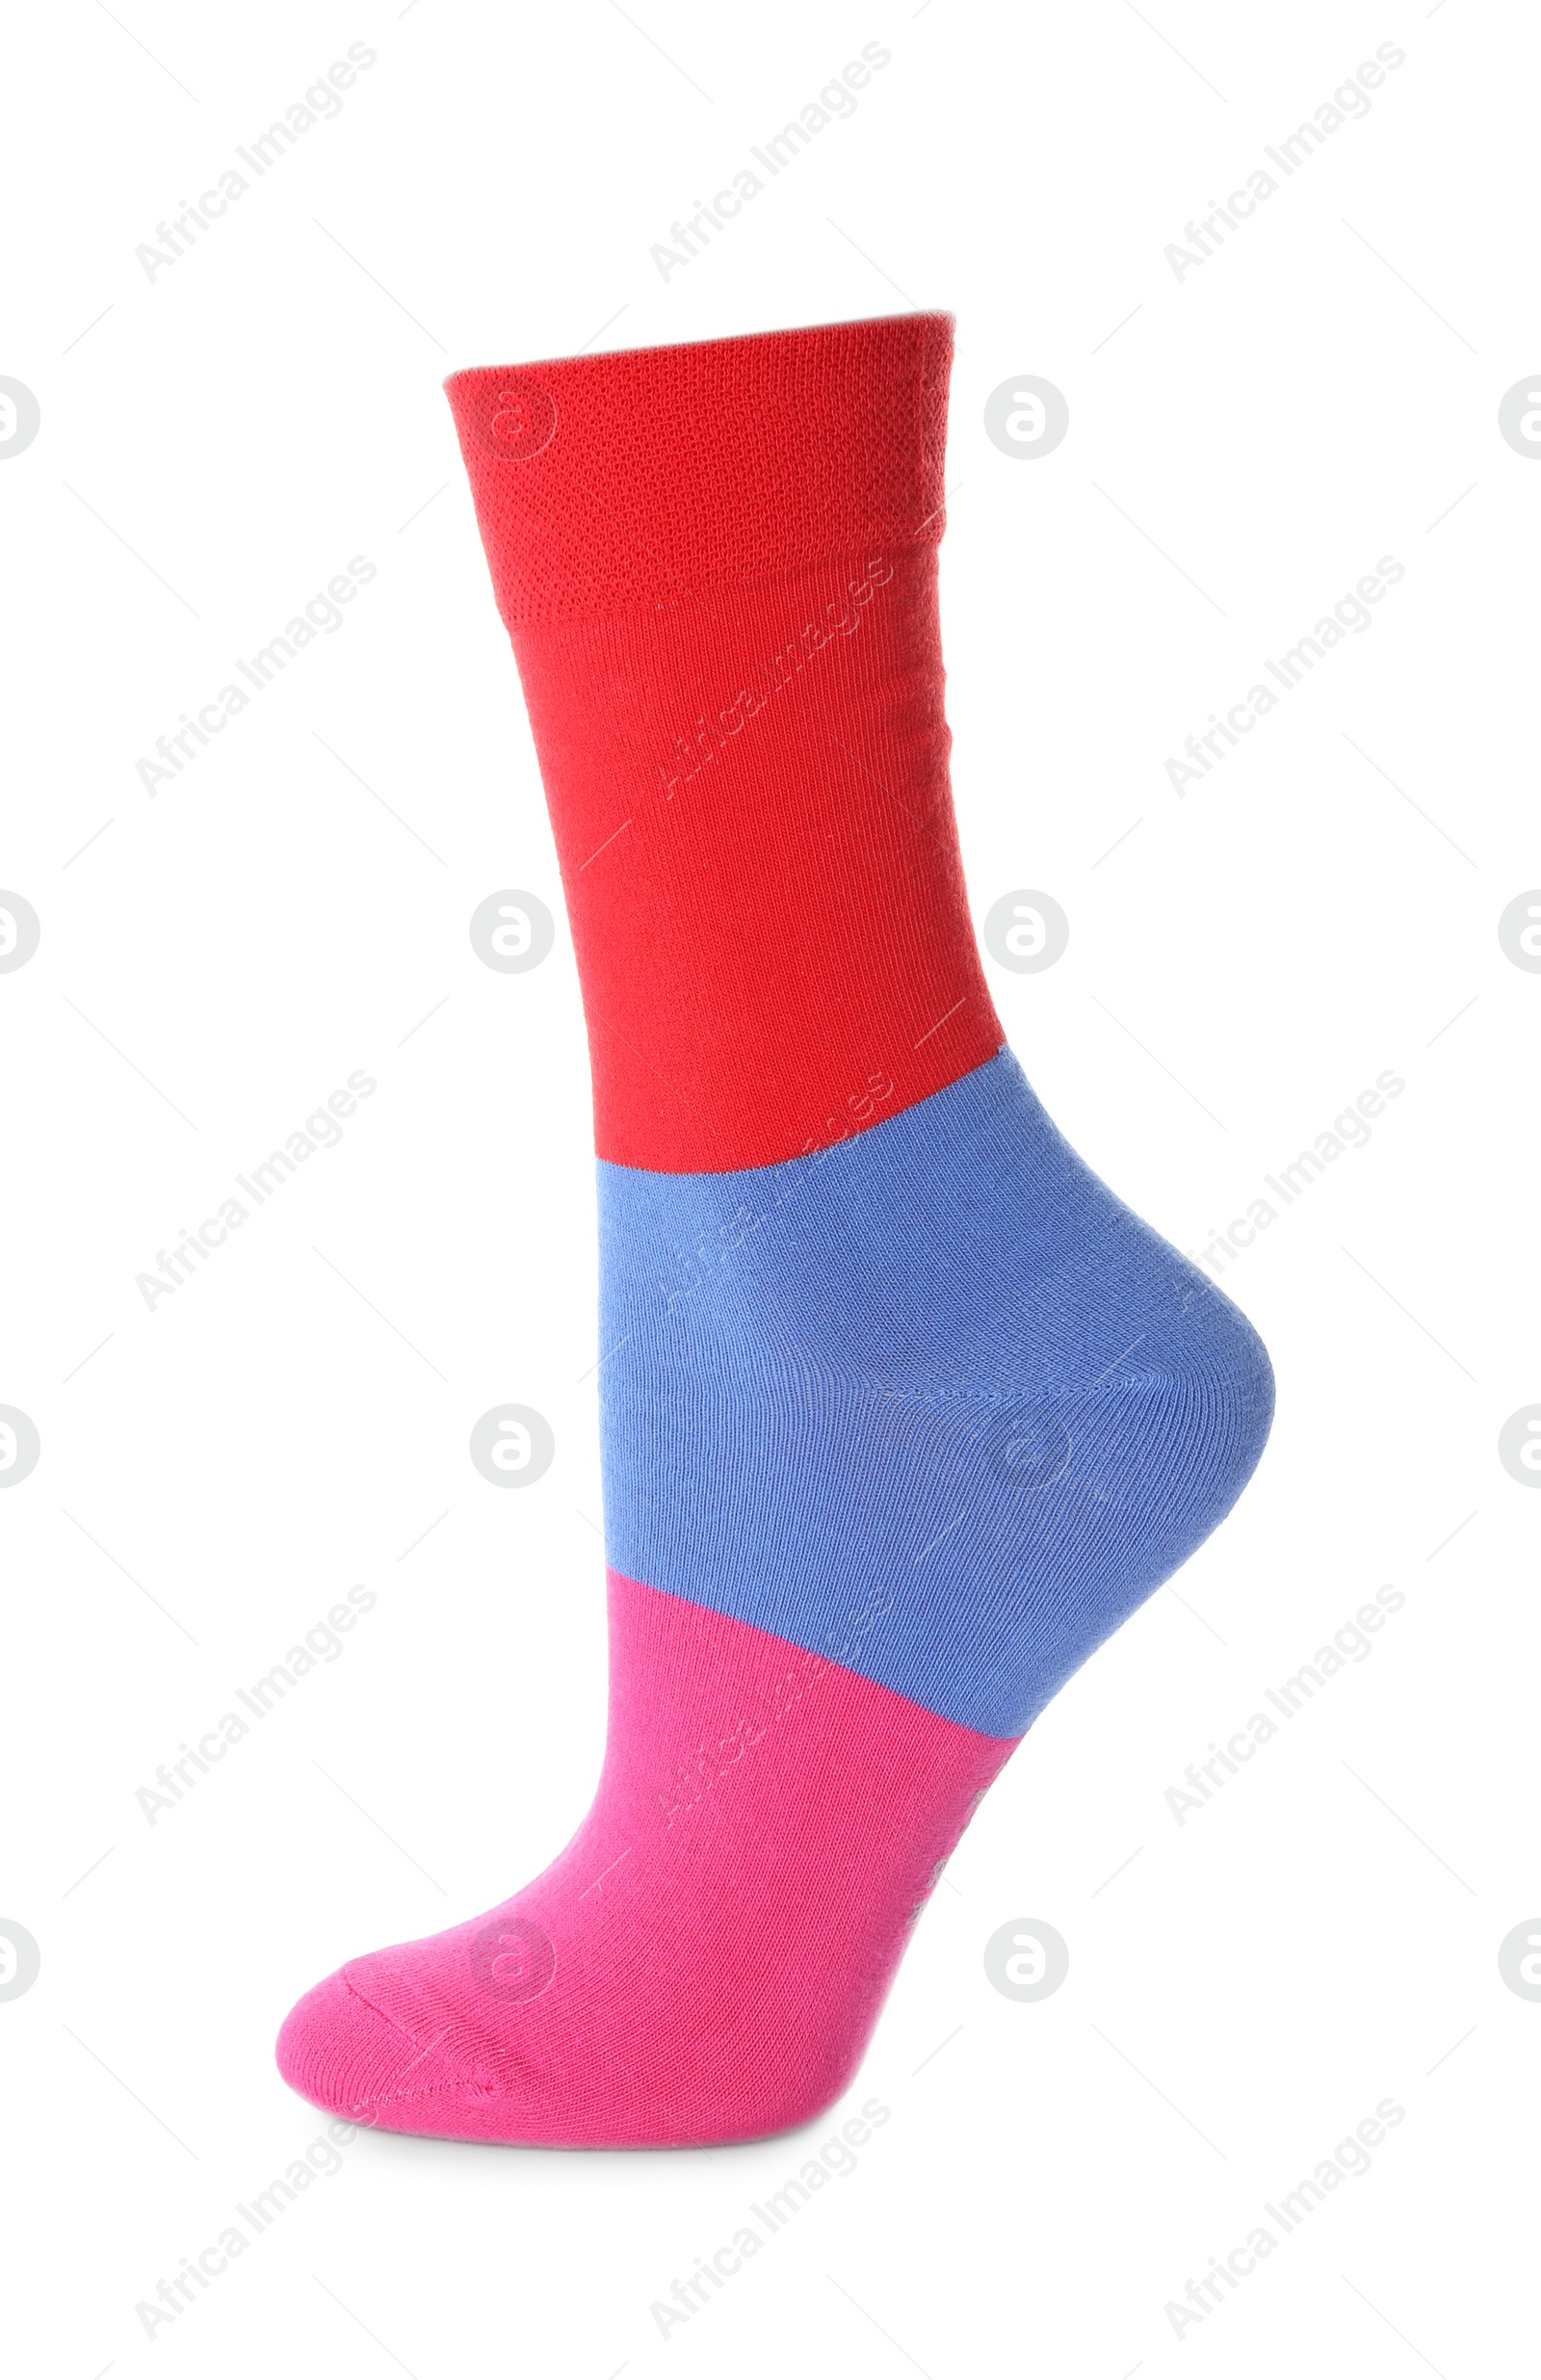 Photo of One colorful striped sock isolated on white